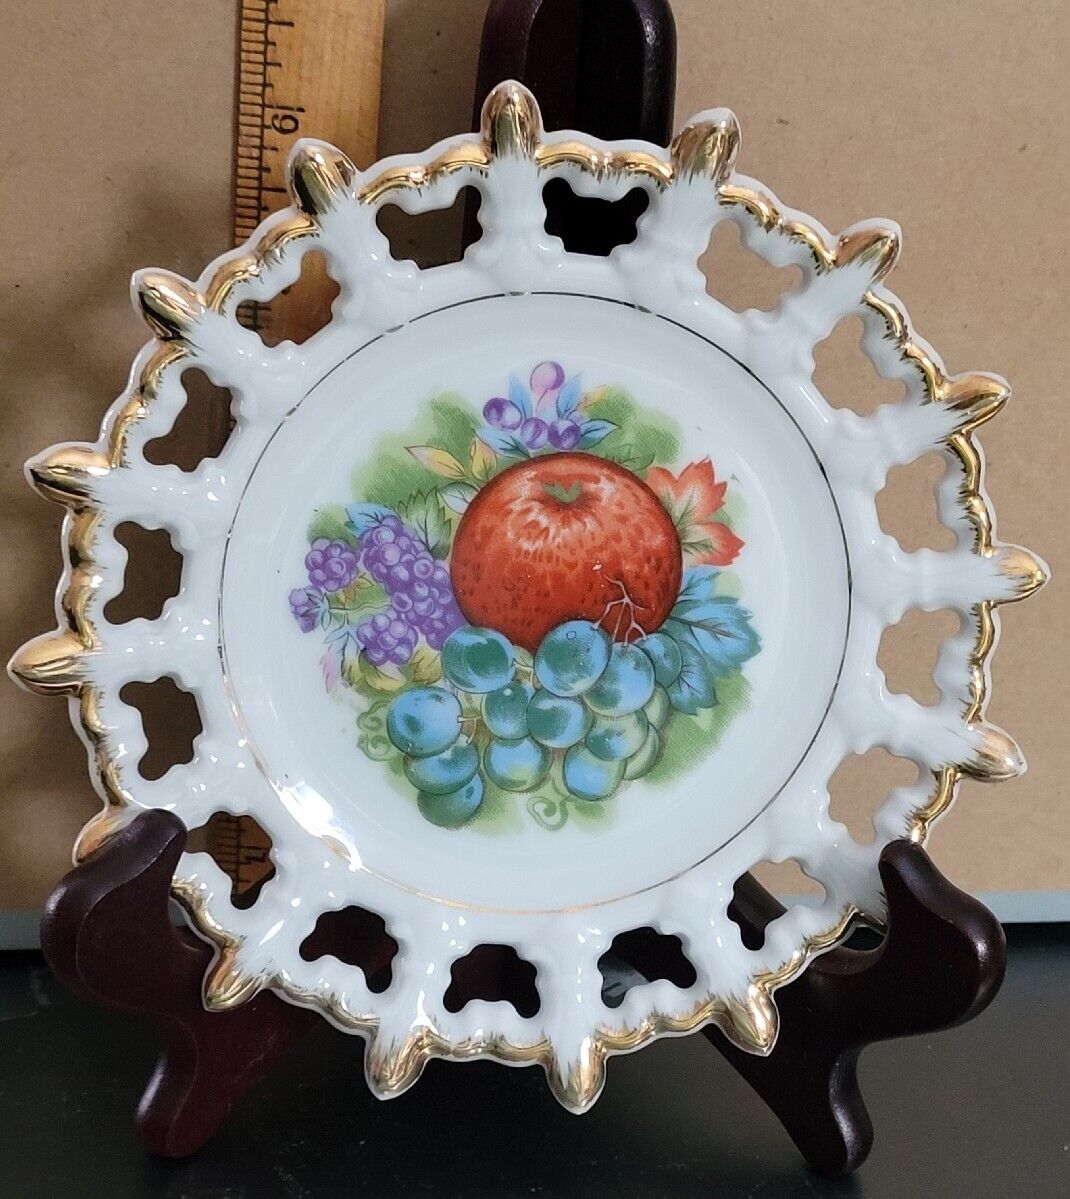 Vintage Decorative Small Plate With Fruit Design NAPCO HANDPAINTED